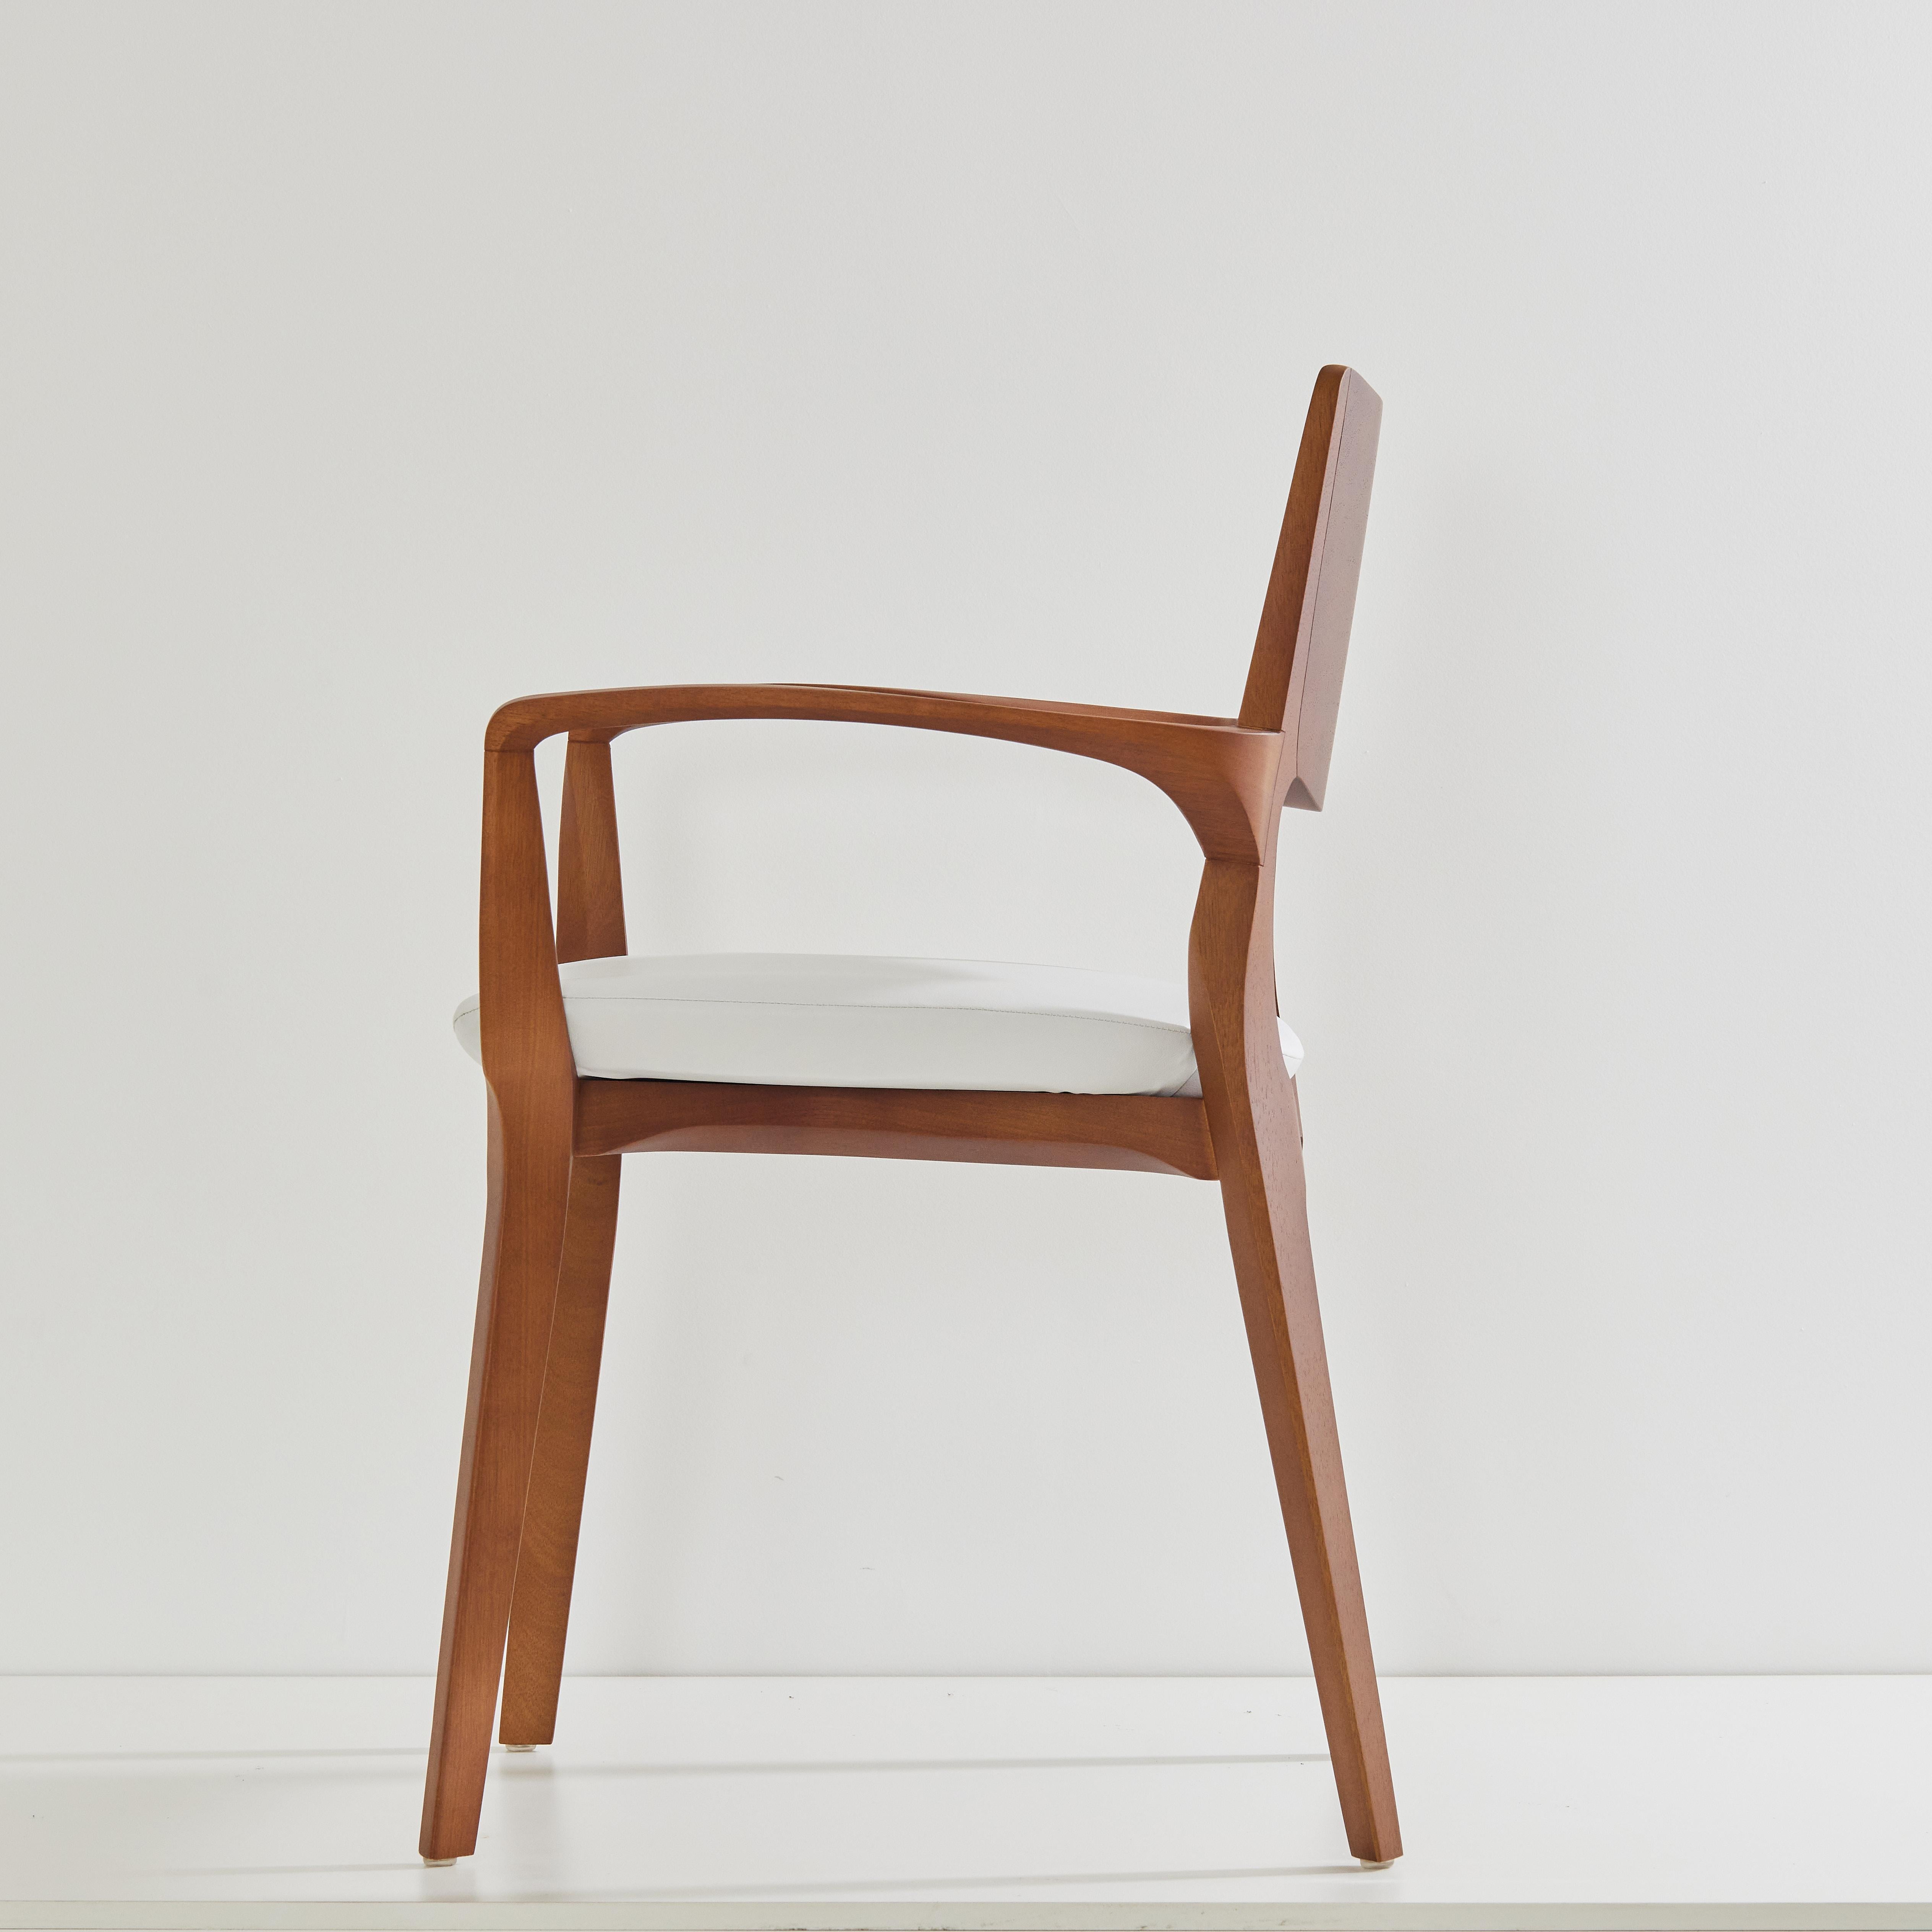 Caning Post-Modern Style Aurora Chair in honey solid wood, vegan leather seating For Sale